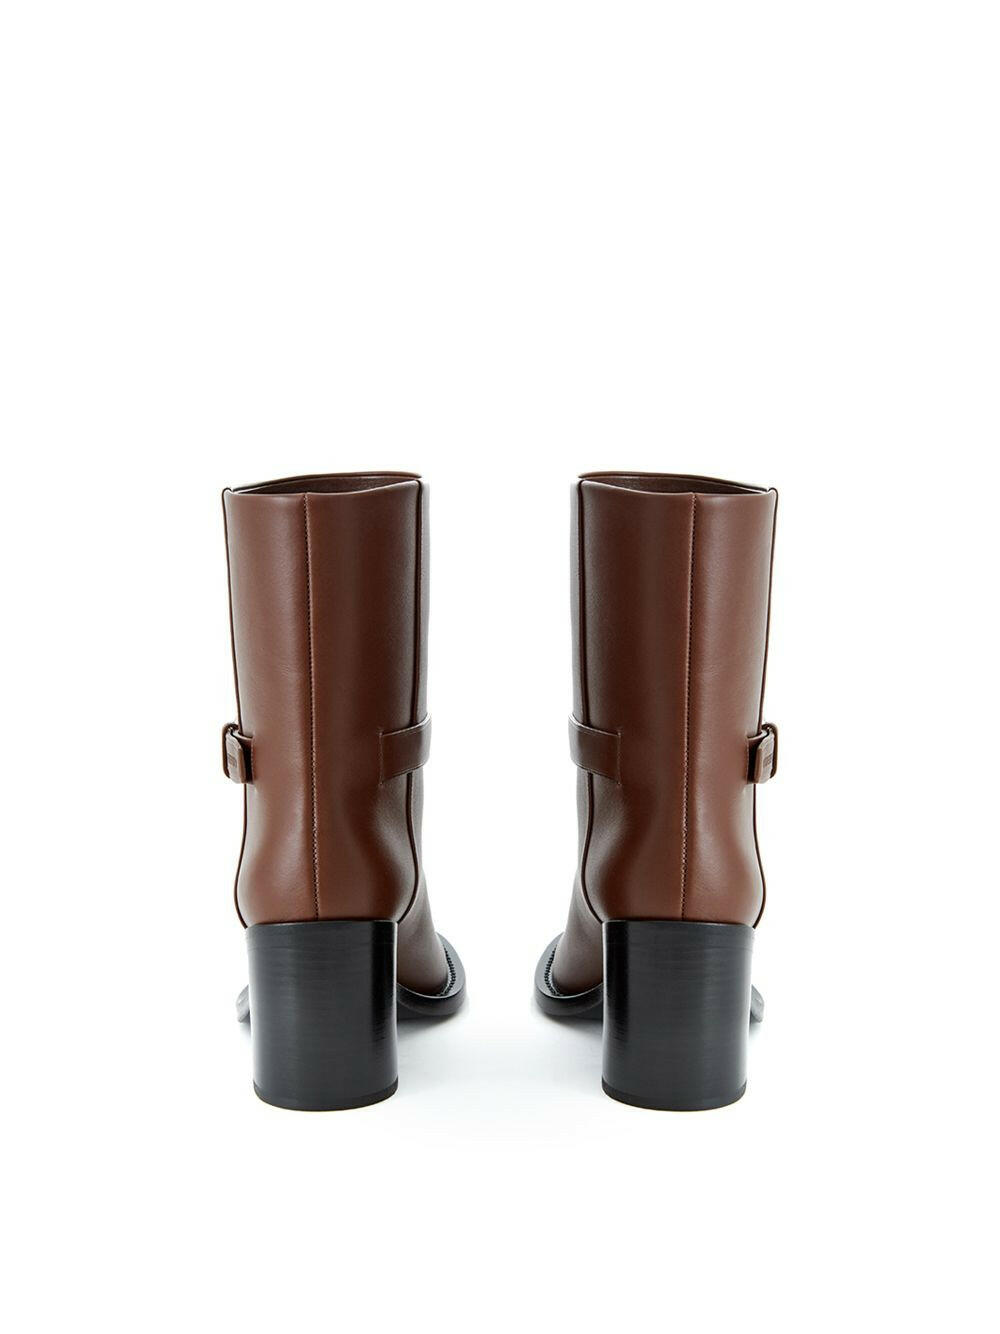 Burberry Brown Leather Ankle Boots - GENUINE AUTHENTIC BRAND LLC  